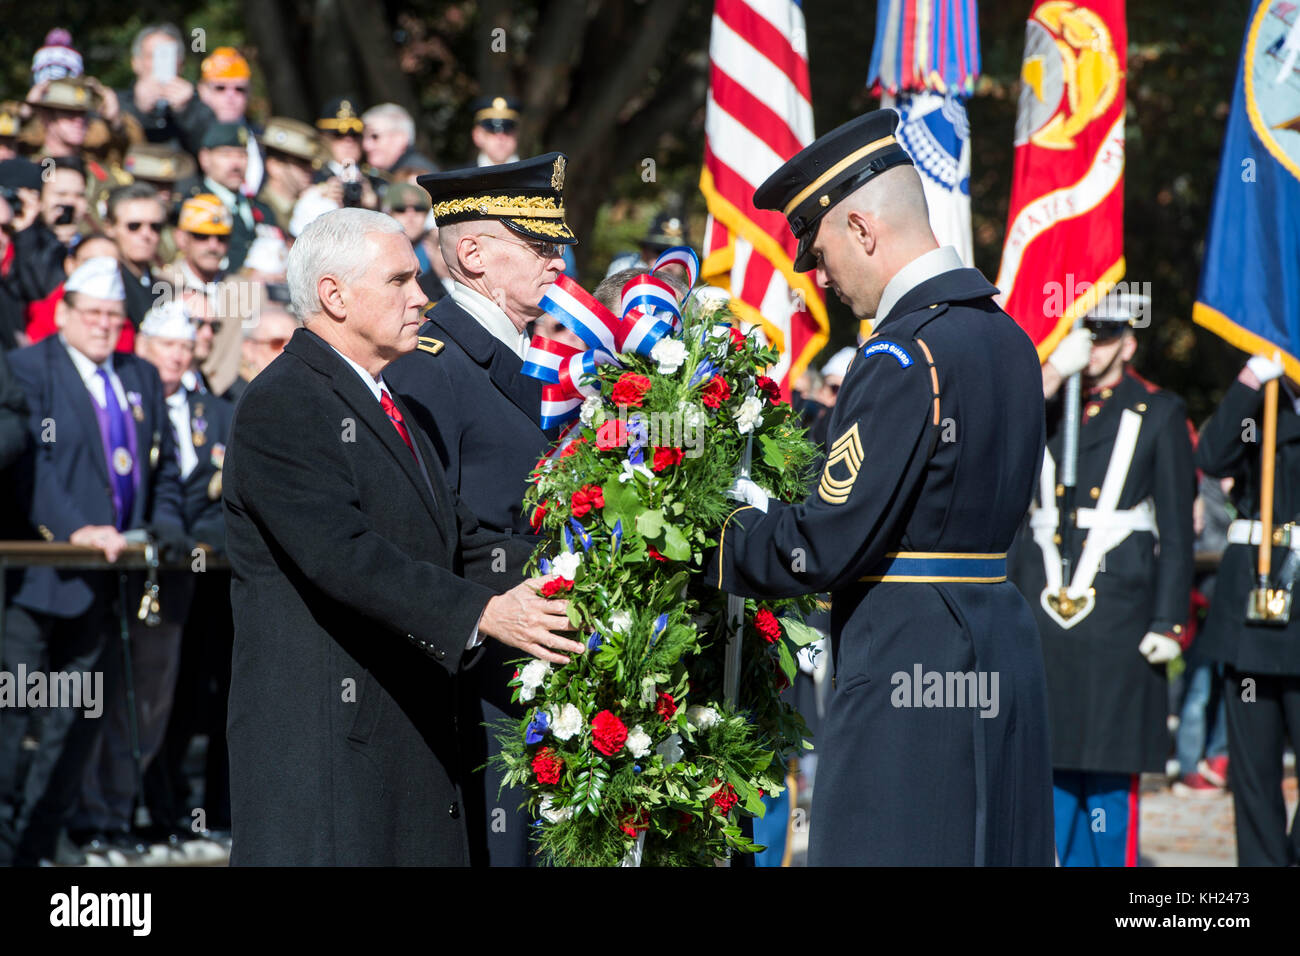 Vice President Michael Pence lays a wreath at the Tomb of the Unknown Soldier during a Veterans Day ceremony Nov. 11, 2017, at Arlington National Ceme Stock Photo